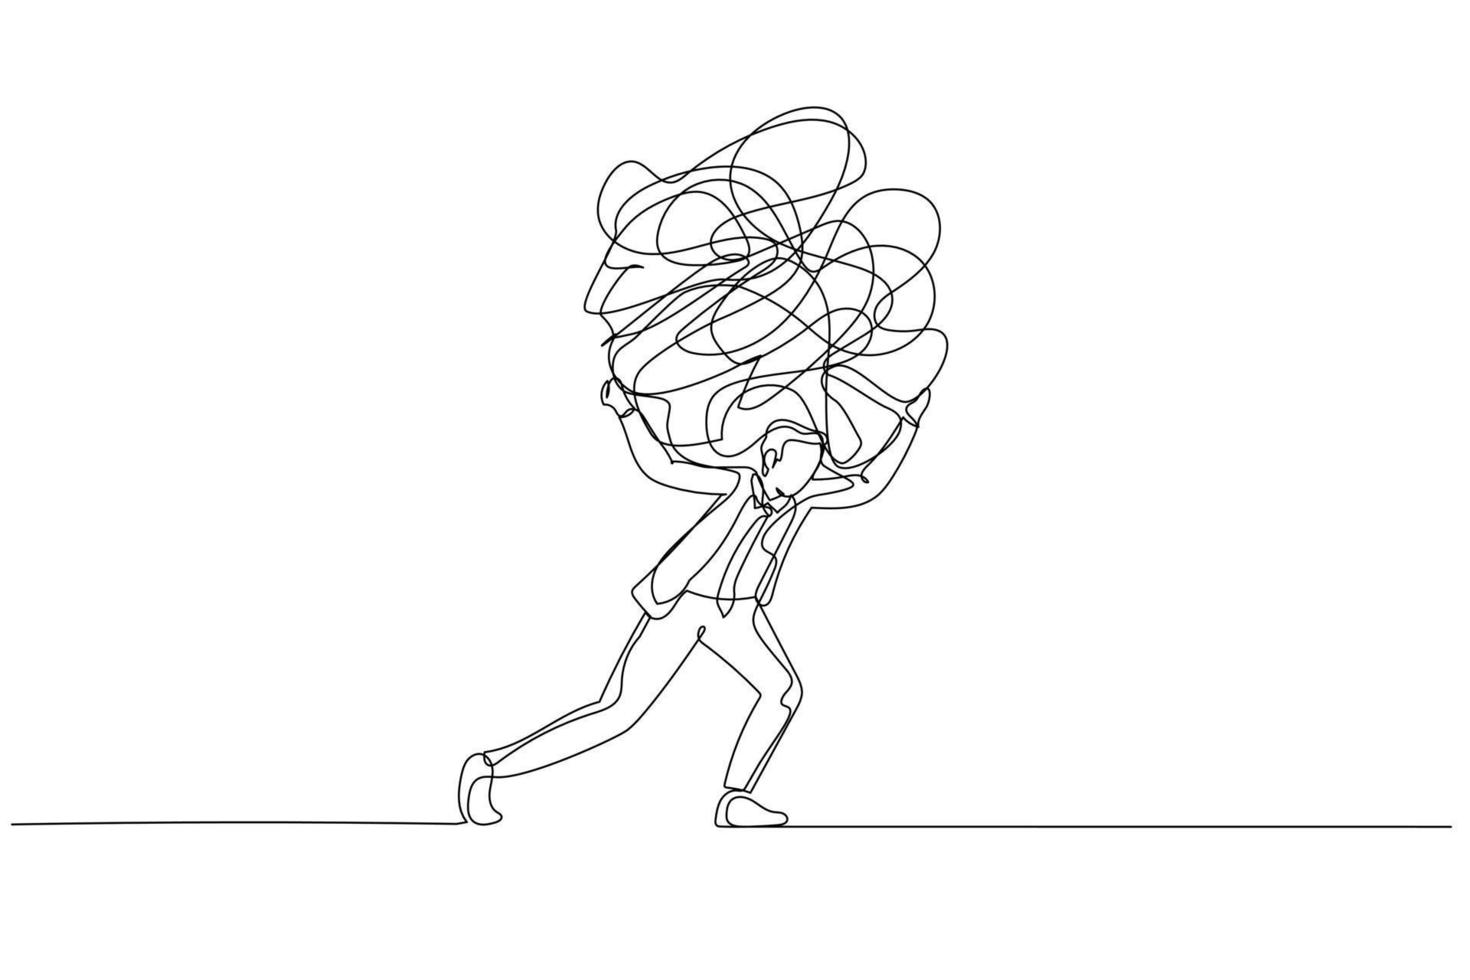 Illustration of businessman carrying heavy messy line on his back metaphor of stress from work. Single continuous line art style vector